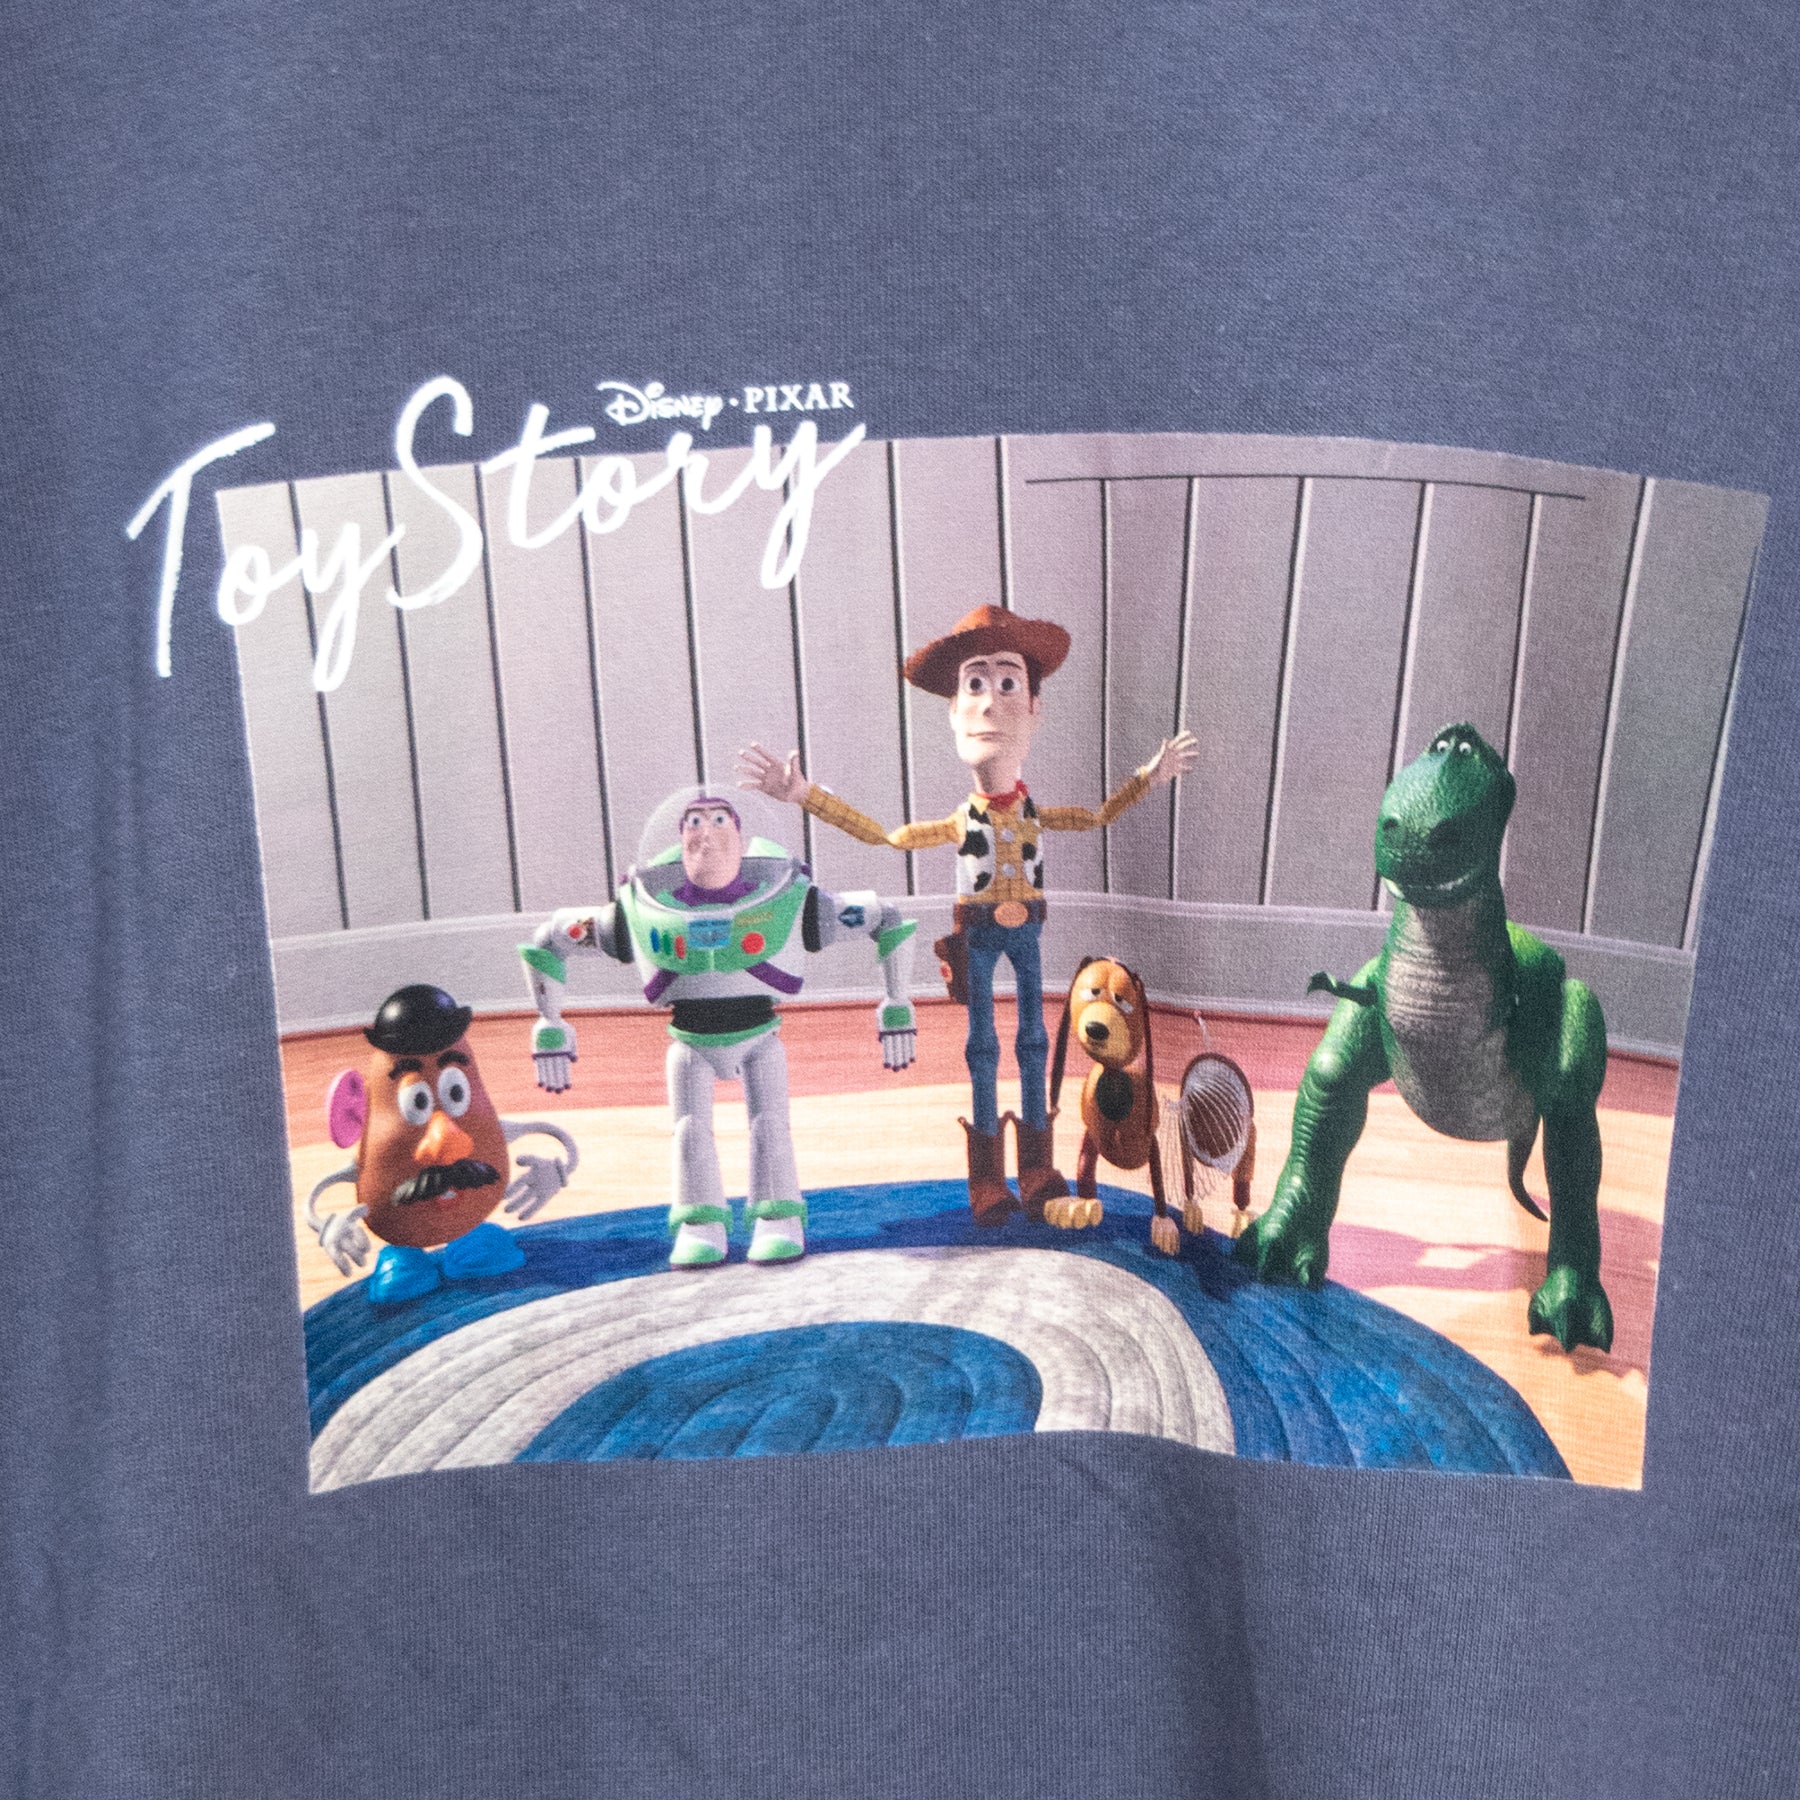 TOY STORY Photo Print L/S T-shirt - YOUAREMYPOISON